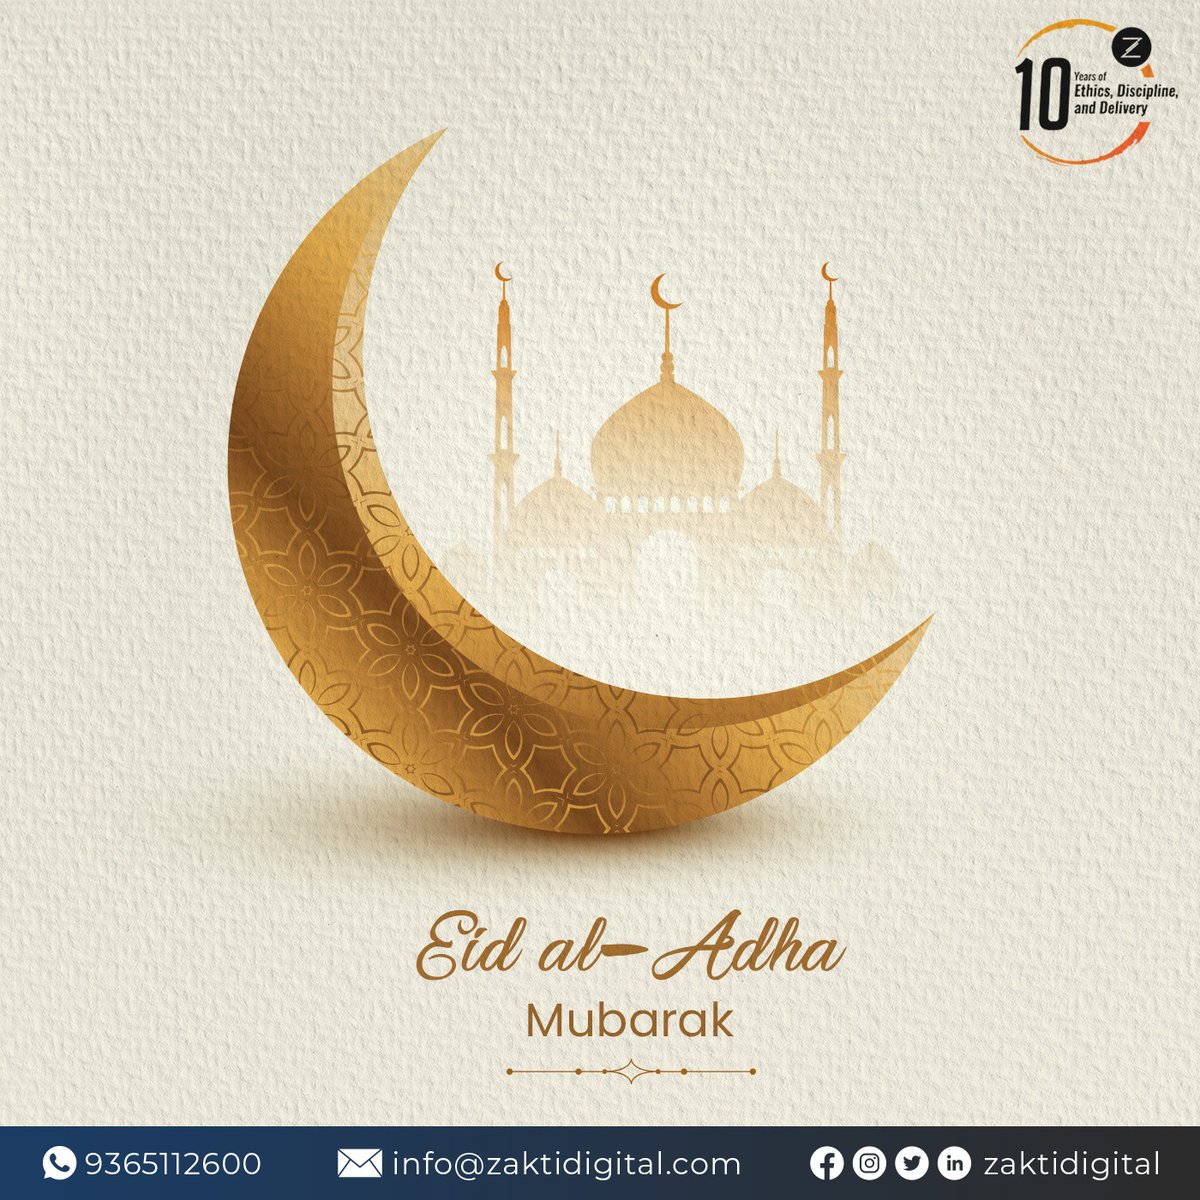 On this beautiful day of Eid al-Adha, may your homes be filled with laughter, your hearts with contentment, and your lives with countless blessings. Wishing you a joyous and memorable Eid!

#EidAlAdha #eidwishes #eidmubarak2023